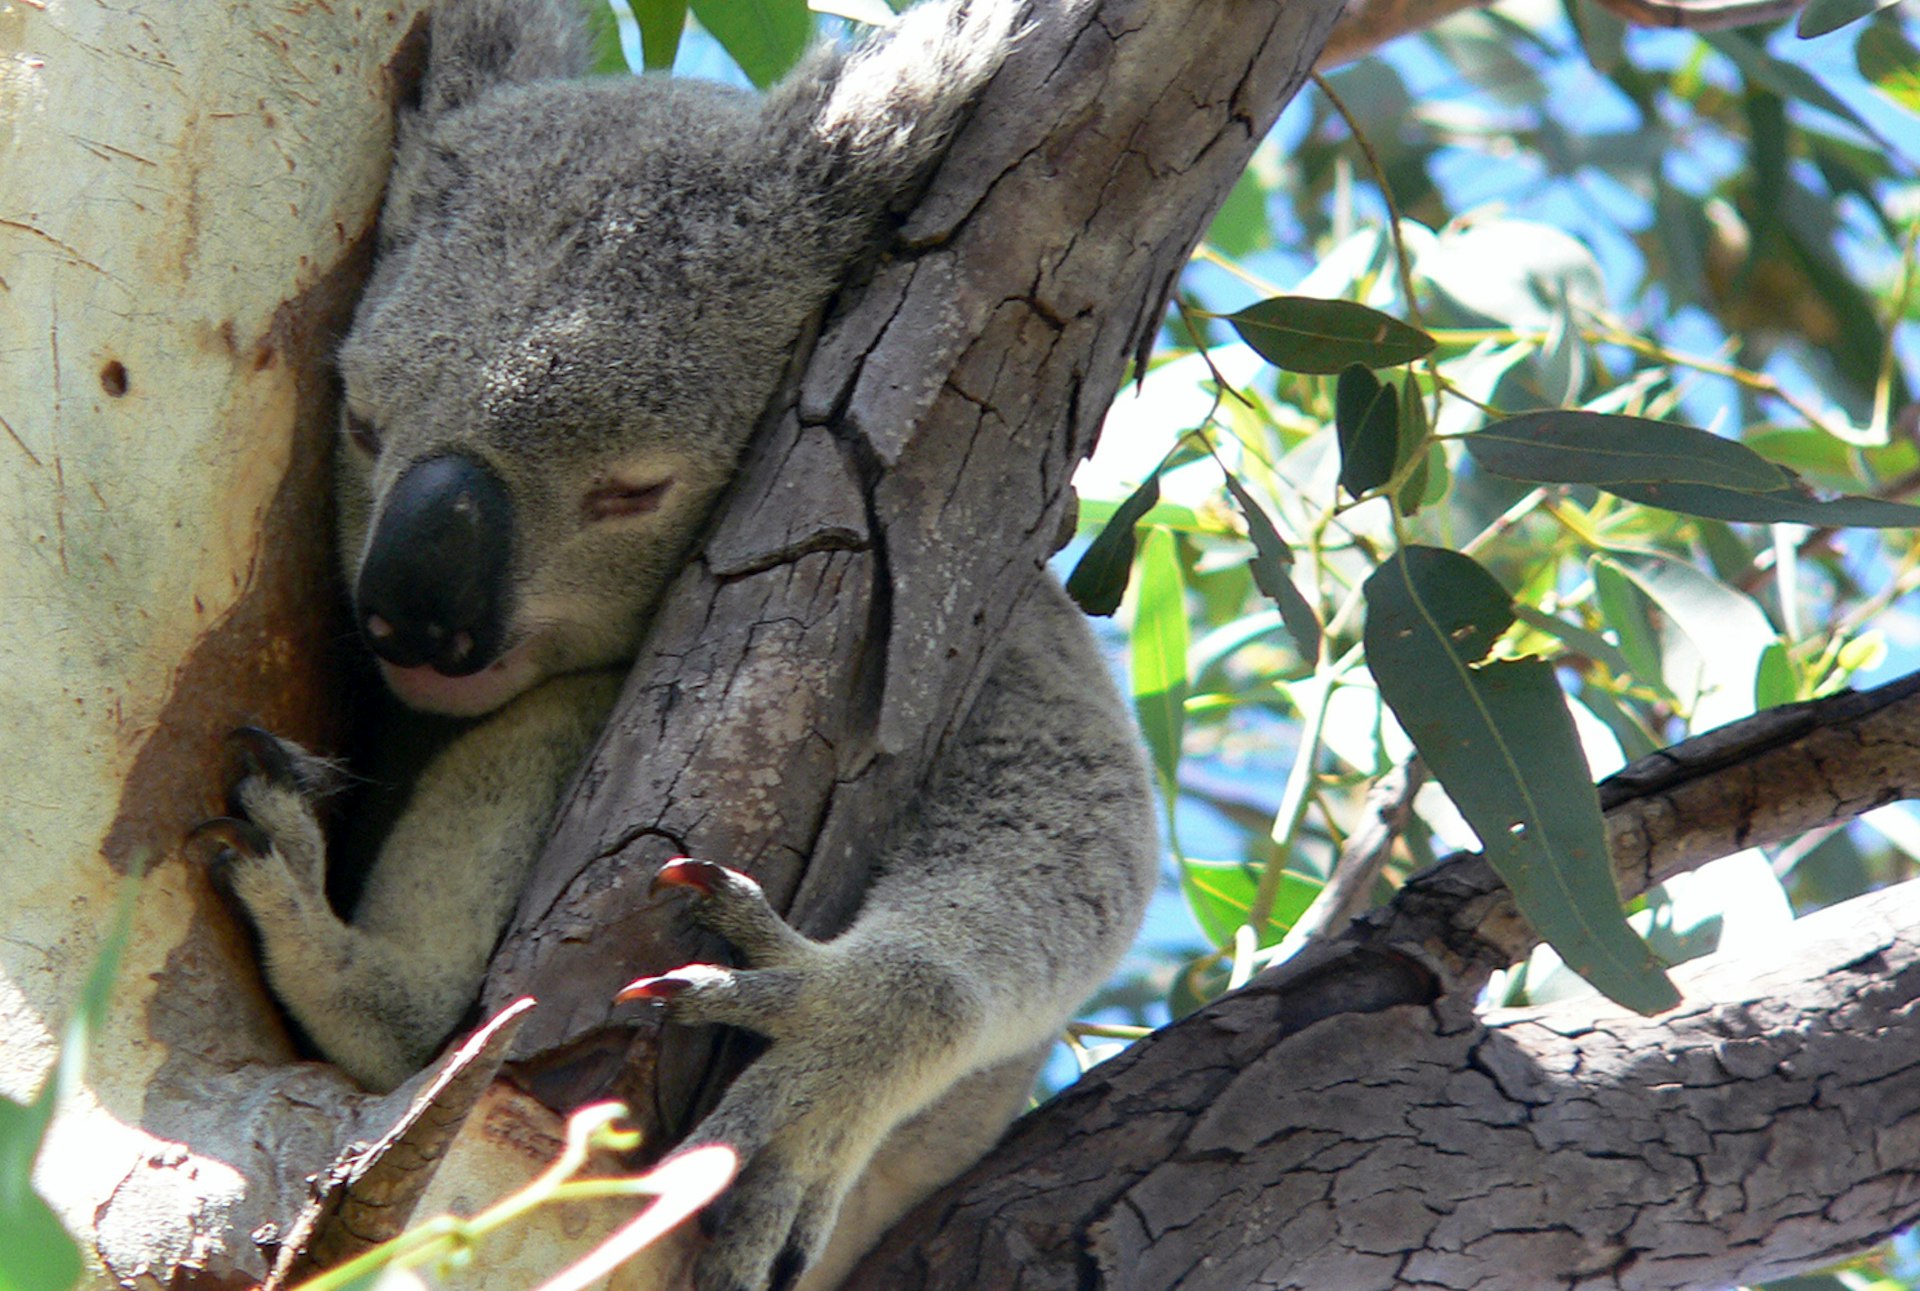 After a hedonistic blowout at the full-moon parties near Nelly Bay, you might just sleep as deeply as this koala. Image by Richard Gifford / CC BY 2.0